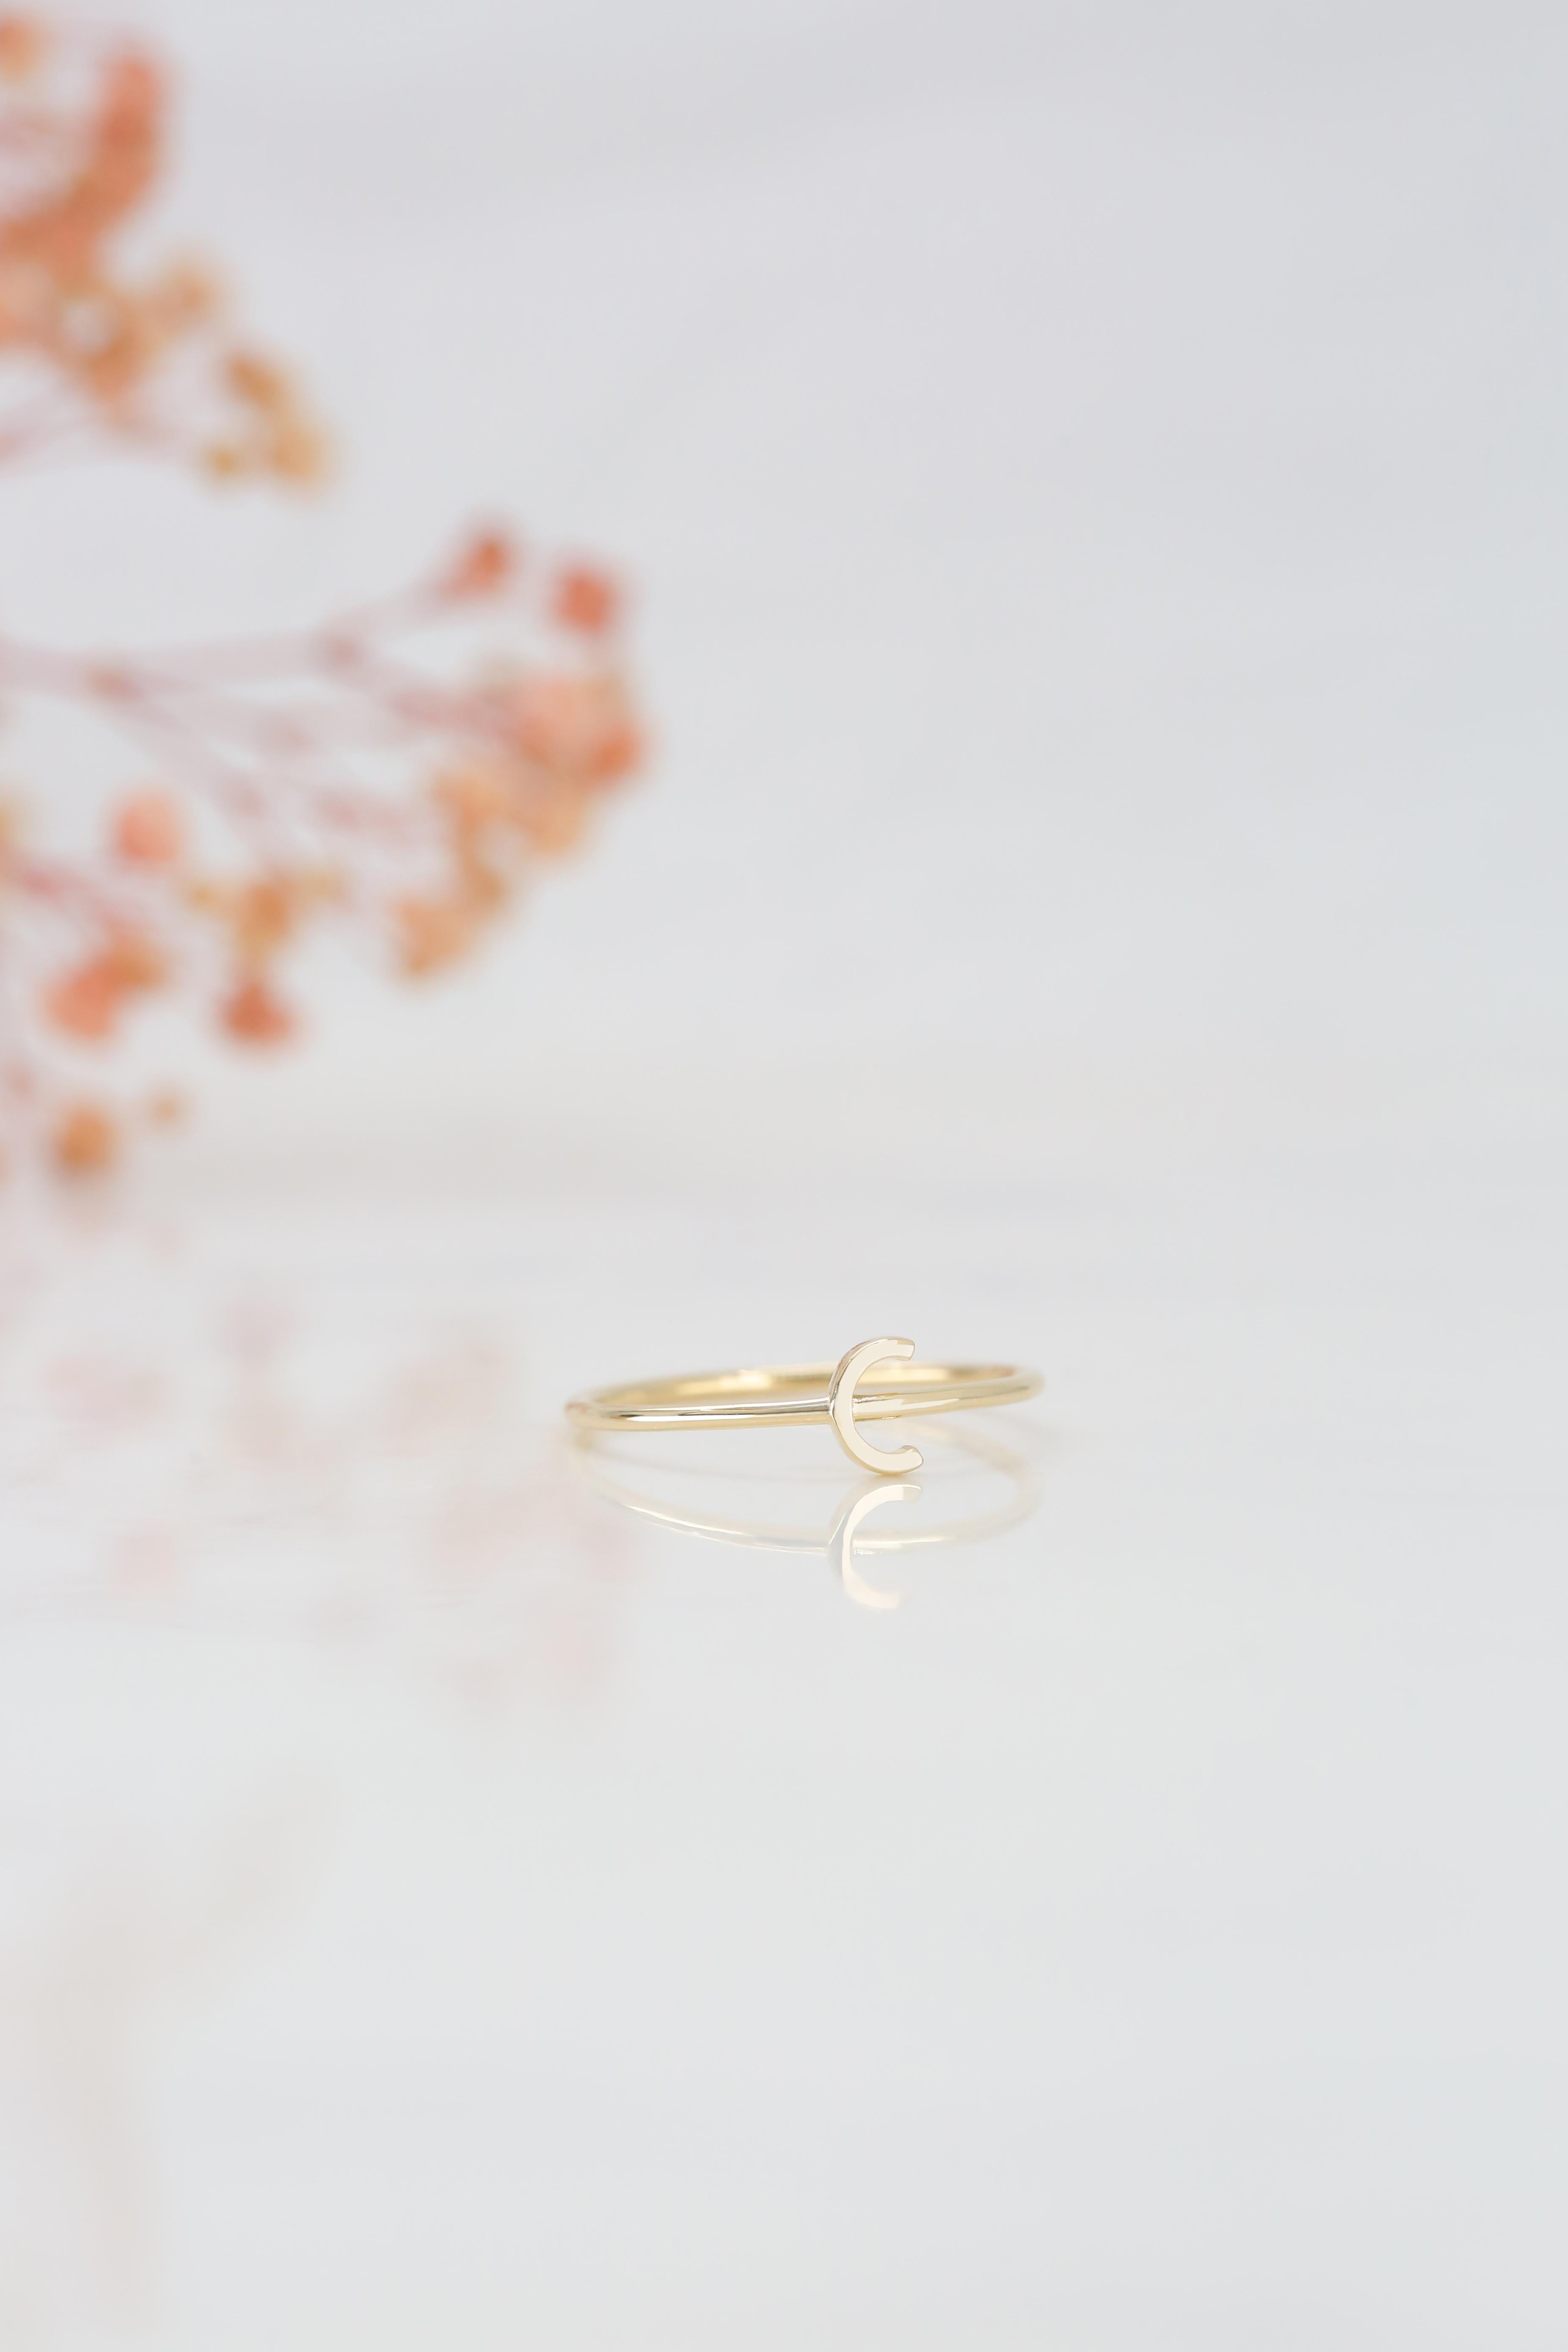 For Sale:  14K Gold Initial C Letter Ring, Personalized Initial Letter Ring 4